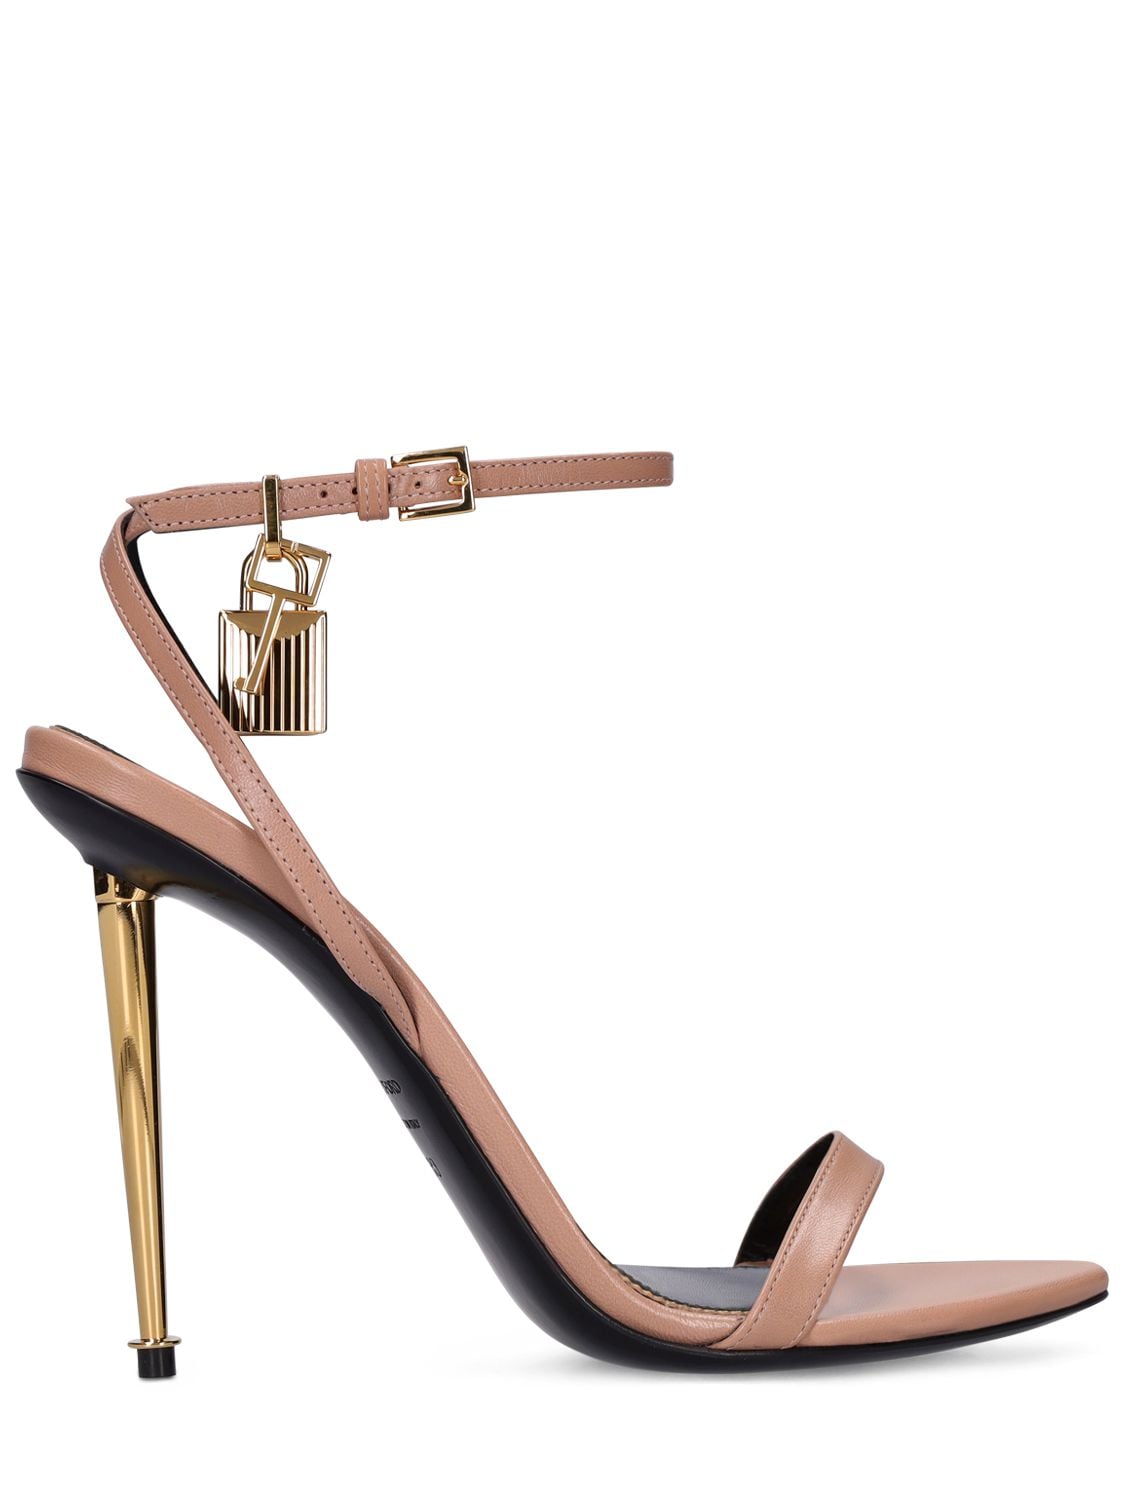 TOM FORD 105mm Padlock Leather Sandals